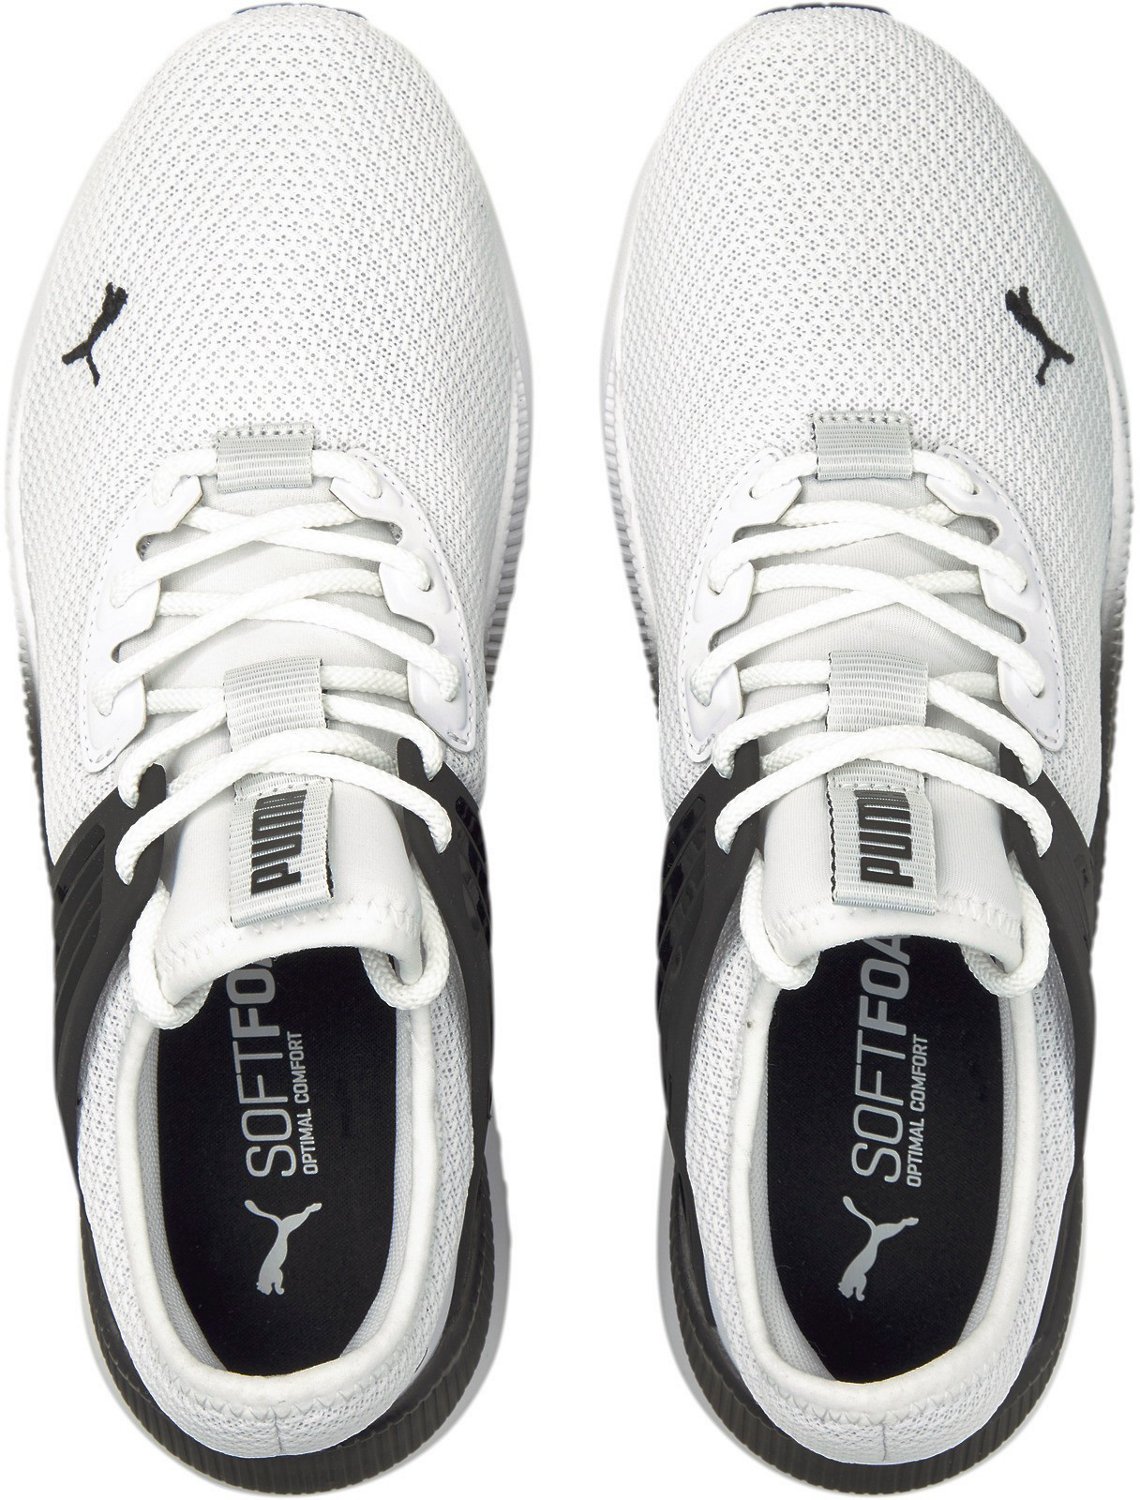 PUMA Men's Pacer Future Running Shoes | Academy